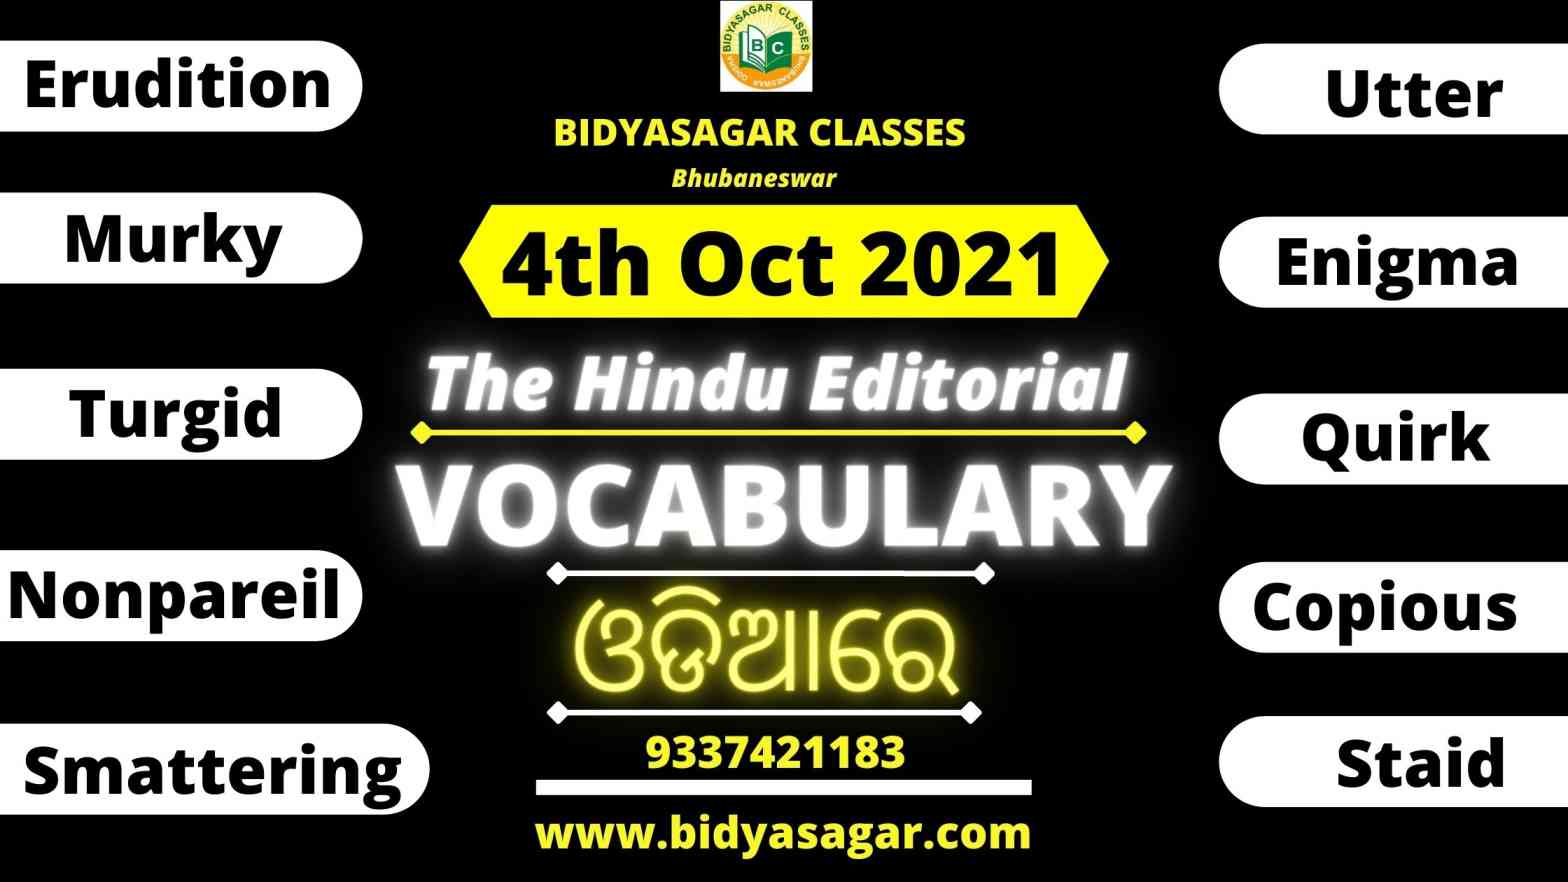 The Hindu Editorial Vocabulary of 4th October 2021